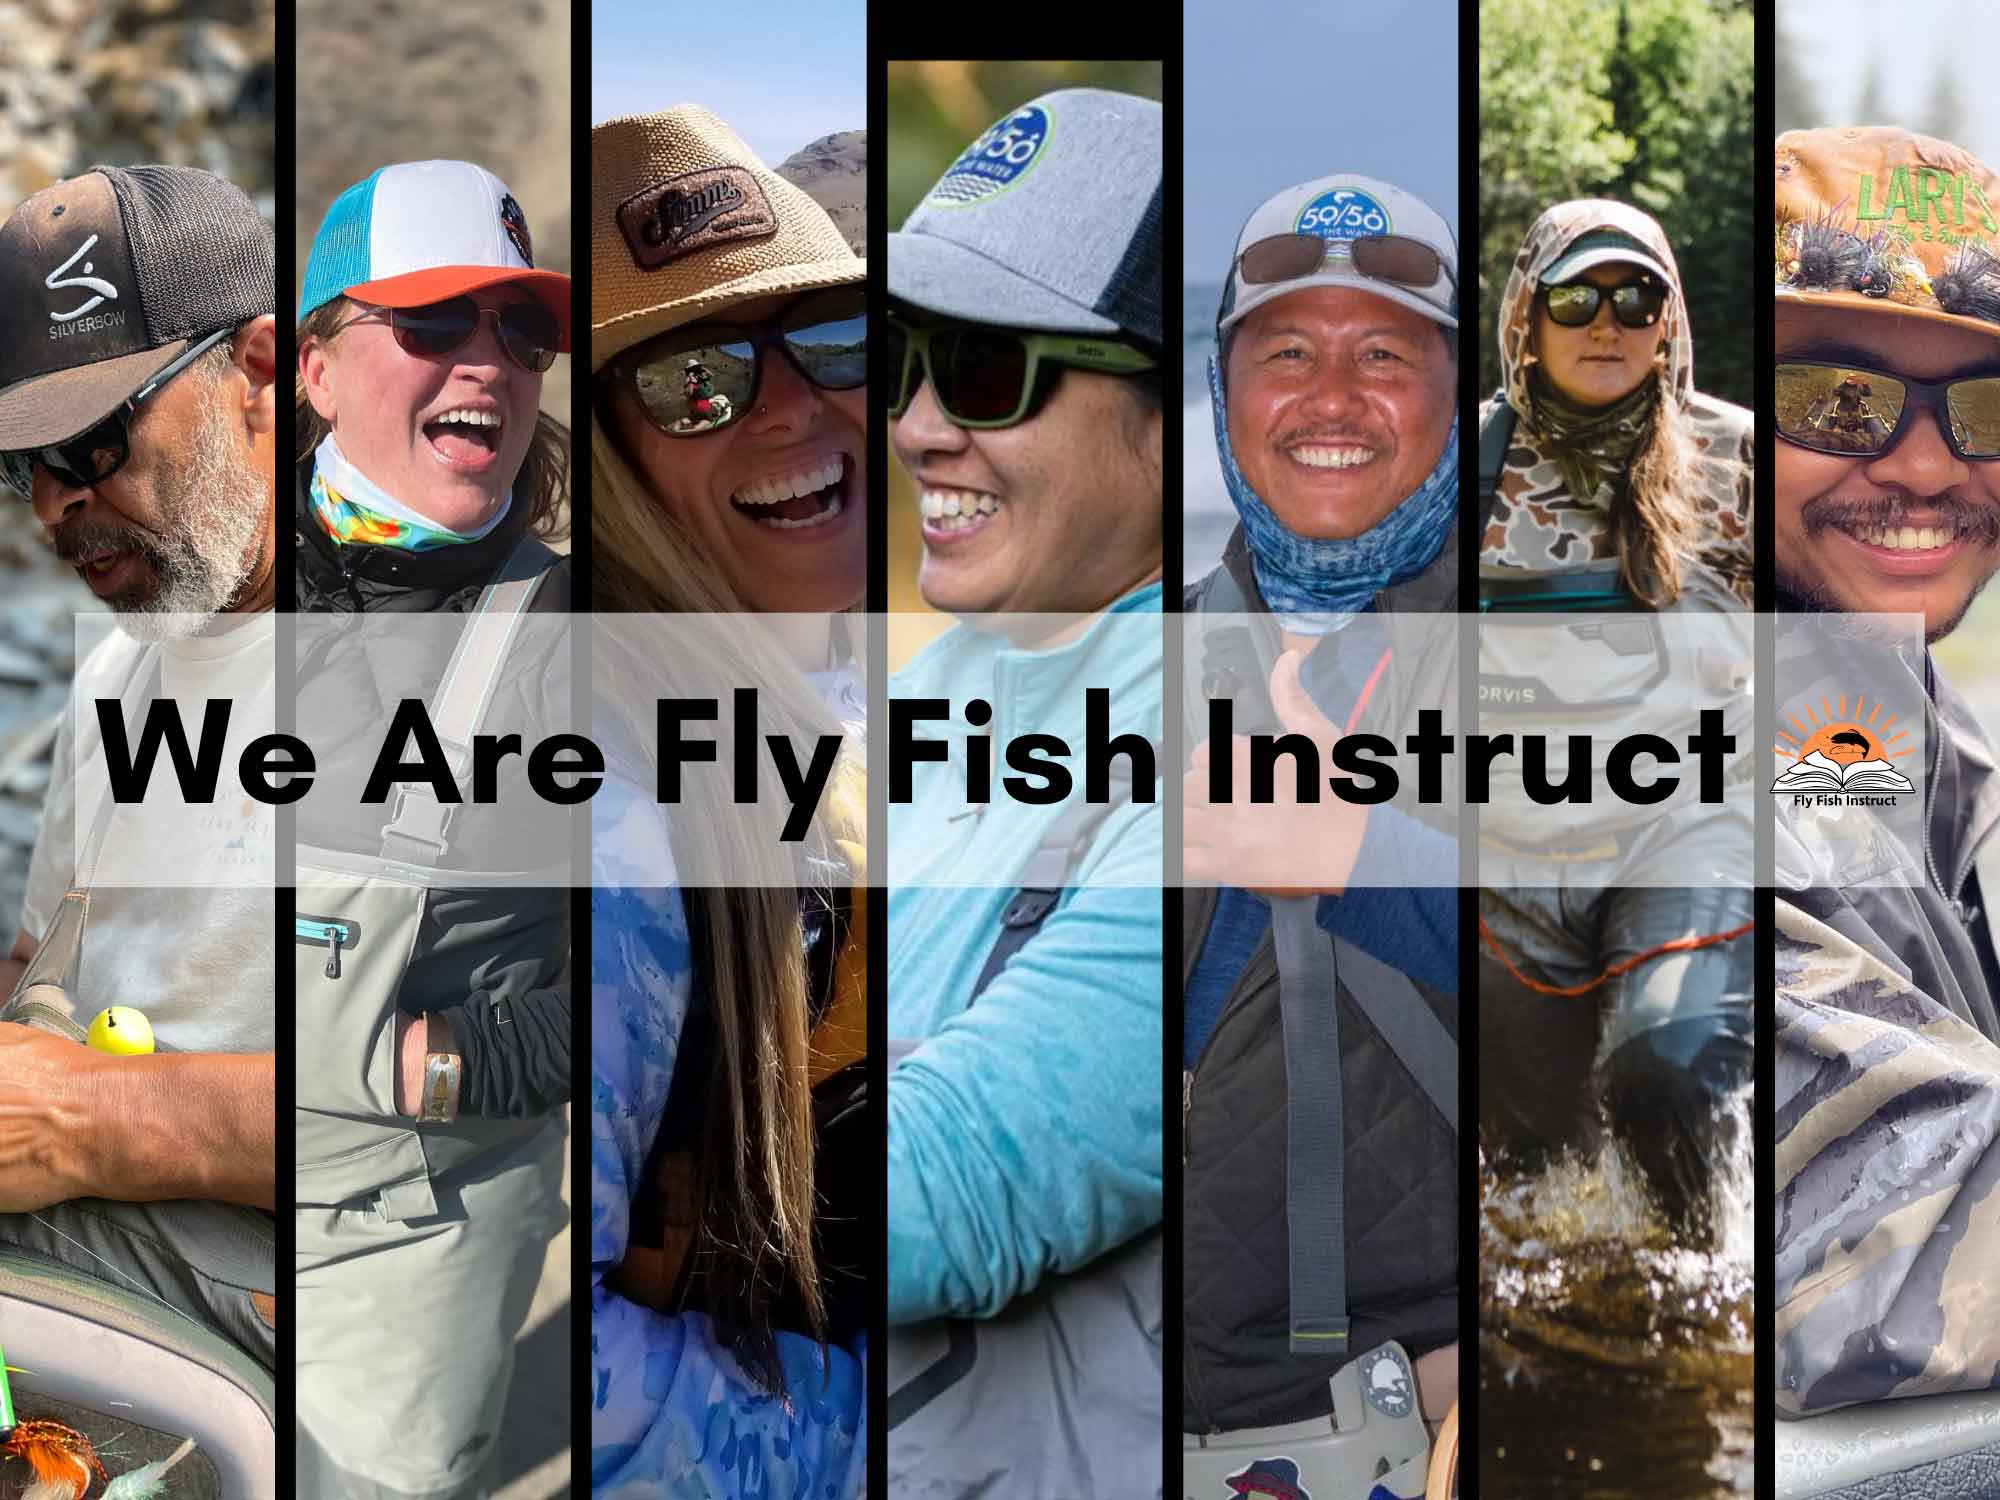 We-Are-Fly-Fish-Instruct